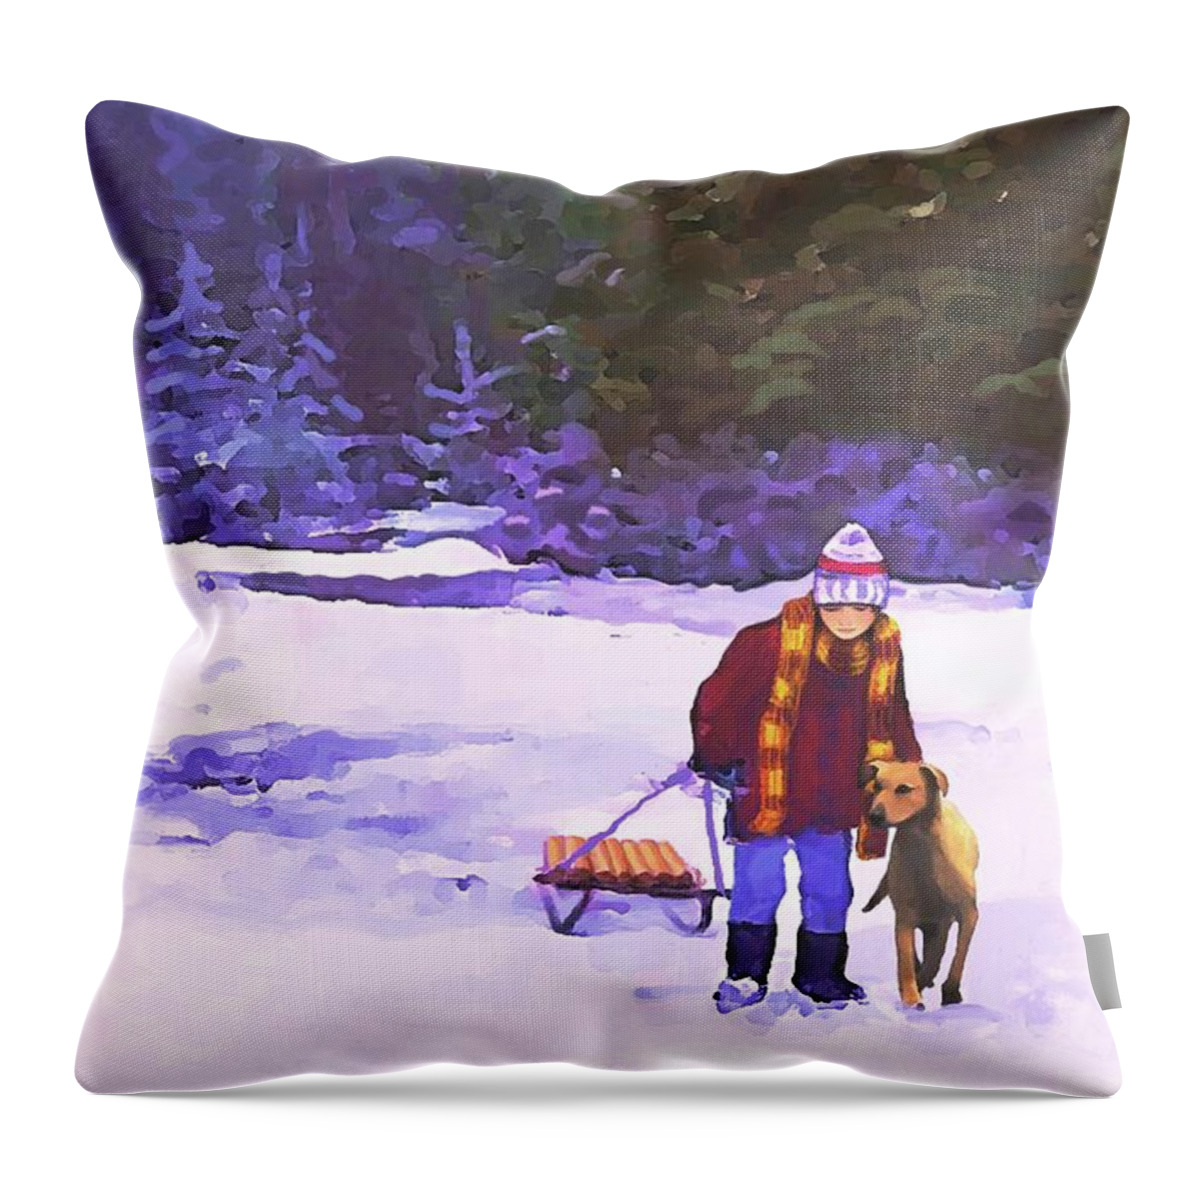 Landscape Throw Pillow featuring the painting Me and My Buddy by SophiaArt Gallery